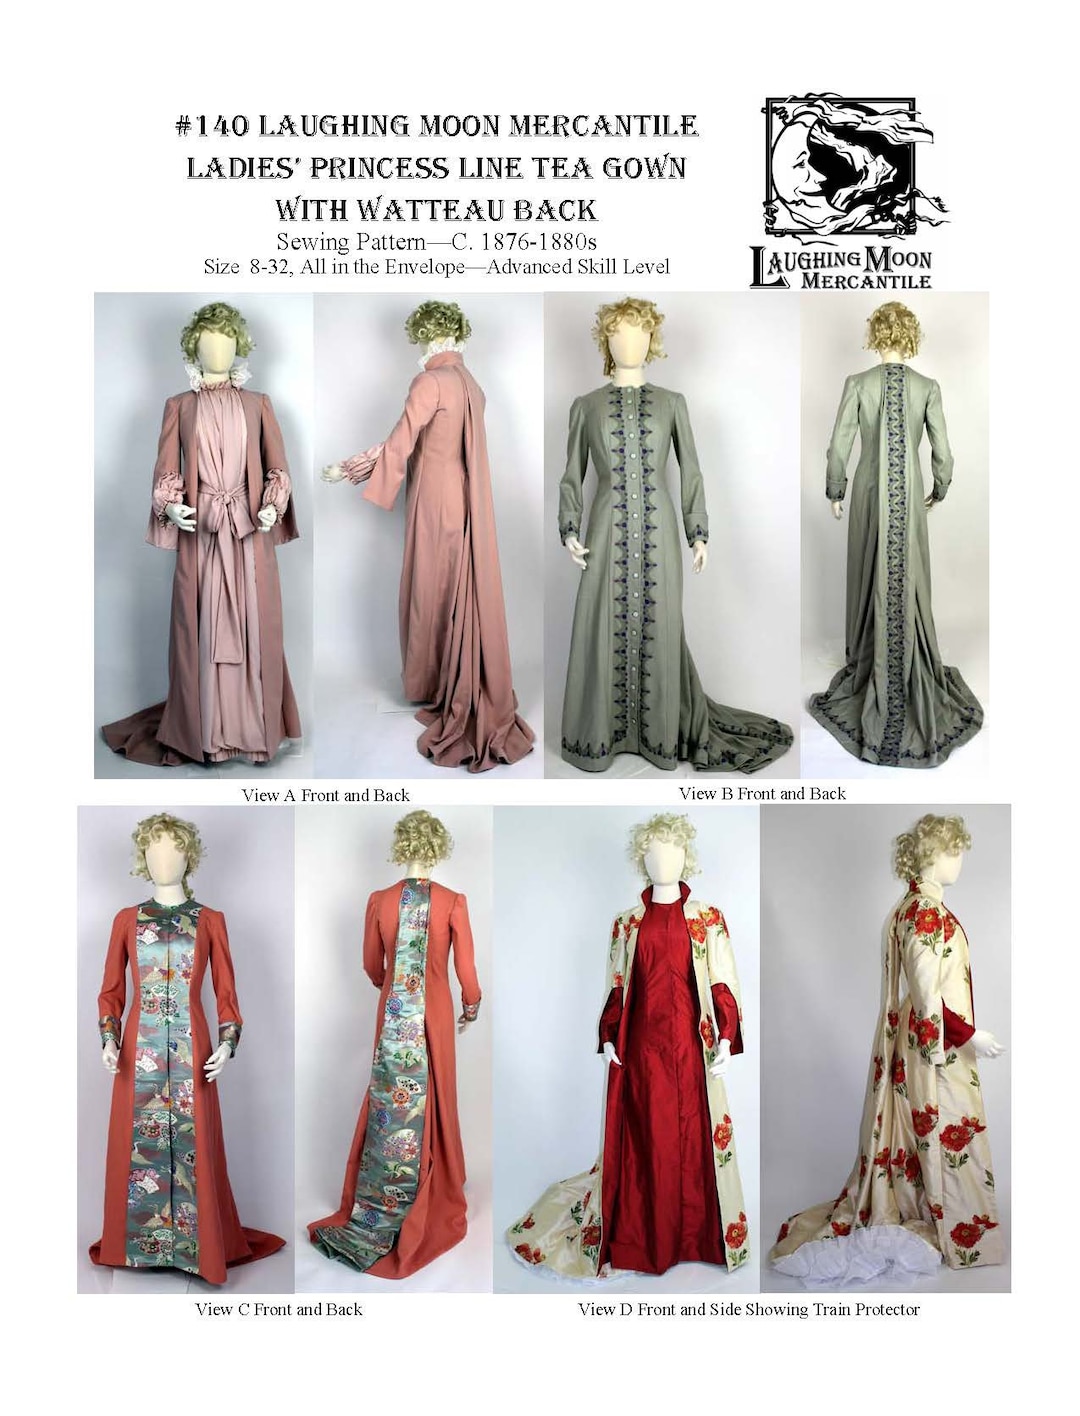 Pin by Lornsy on Beautiful couture | Historical dresses, Vintage dresses,  Vintage gowns